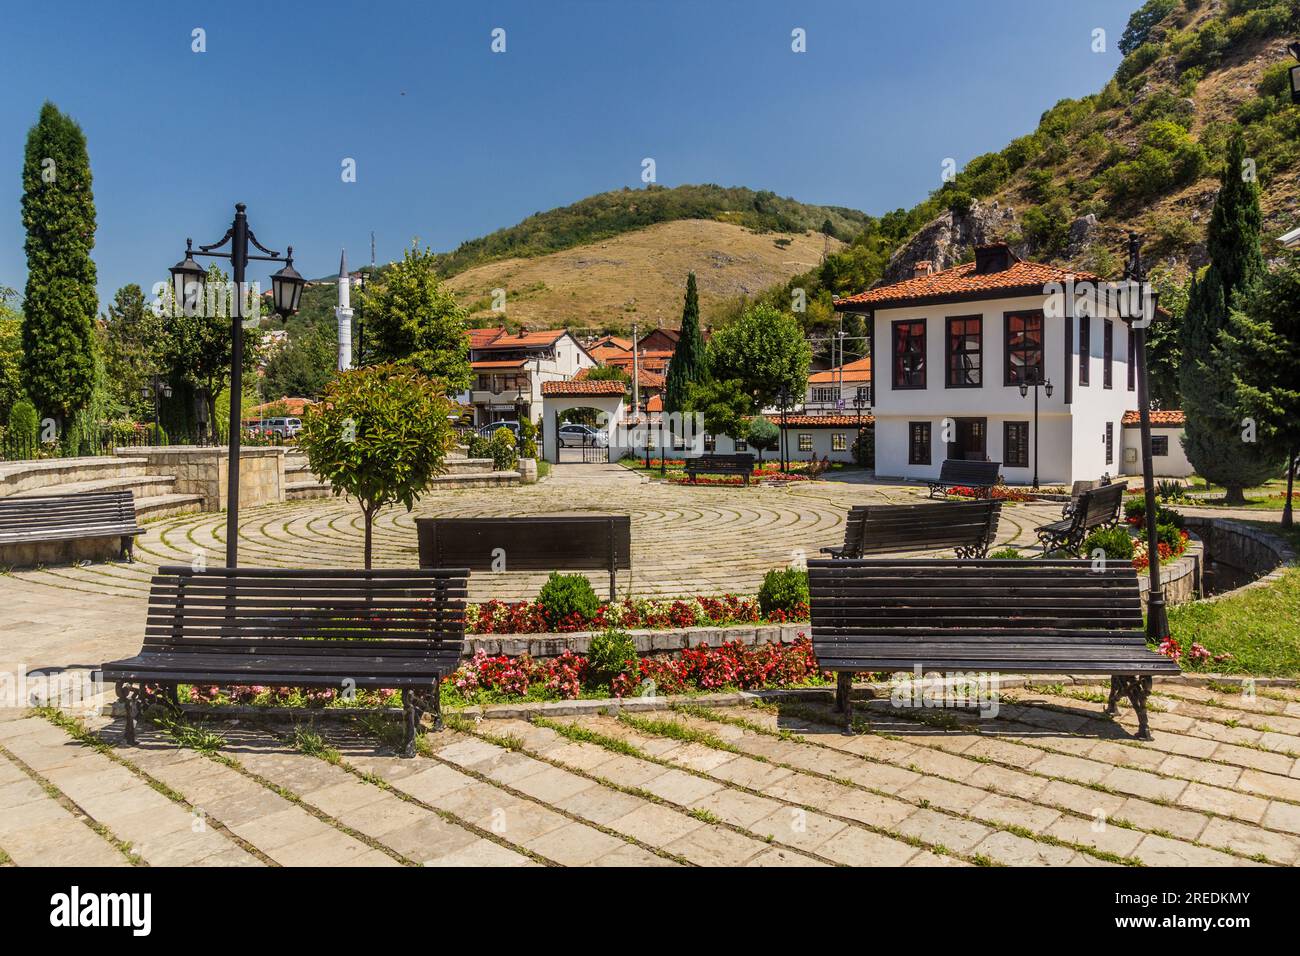 Grounds of the Monumental Complex of the Albanian League of Prizren, Kosovo Stock Photo